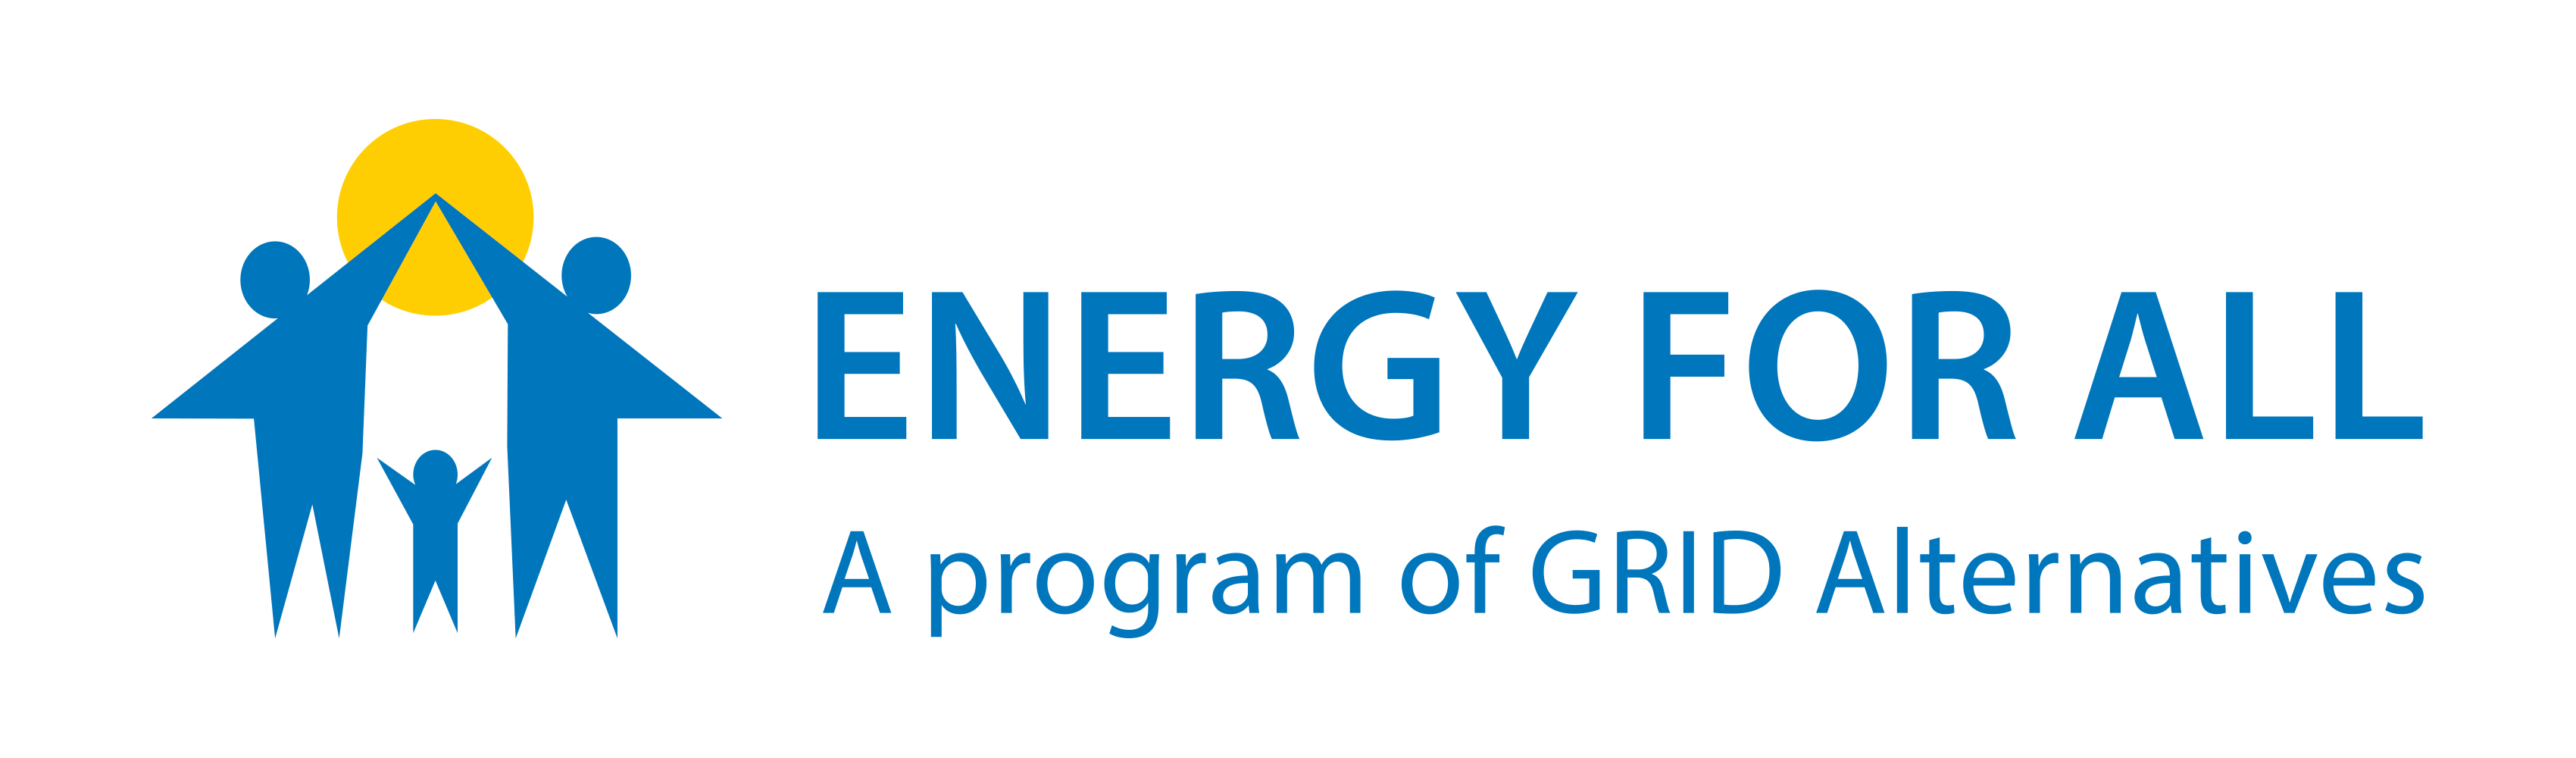 logo, says Energy For All A program of GRID Alternatives, illustration of two parents high-fiving over child, behind sun